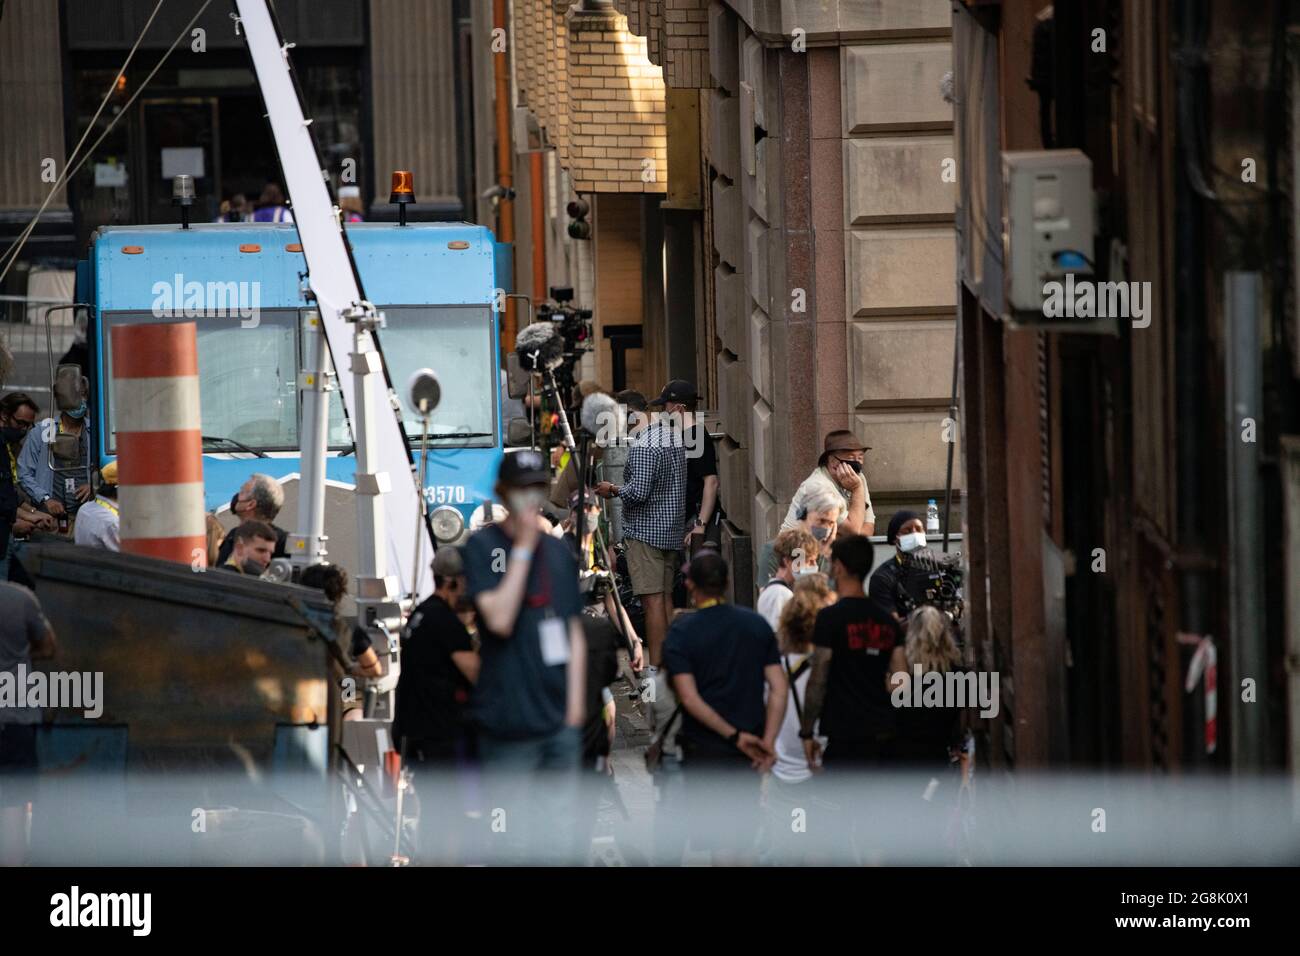 Glasgow, Scotland, UK. 20 July 2021.  PICTURED: Cast members seen in between takes on and off film set. Filming on the set of Indiana Jones 5 in the middle of Glasgow city centre as the Hollywood blockbuster sets up Glasgow as New York City. A full production can be seen, with a large cast, producers and extras. The city centre has been changed so that all the shop fronts and building look like 1959 America. Credit: Colin Fisher Stock Photo